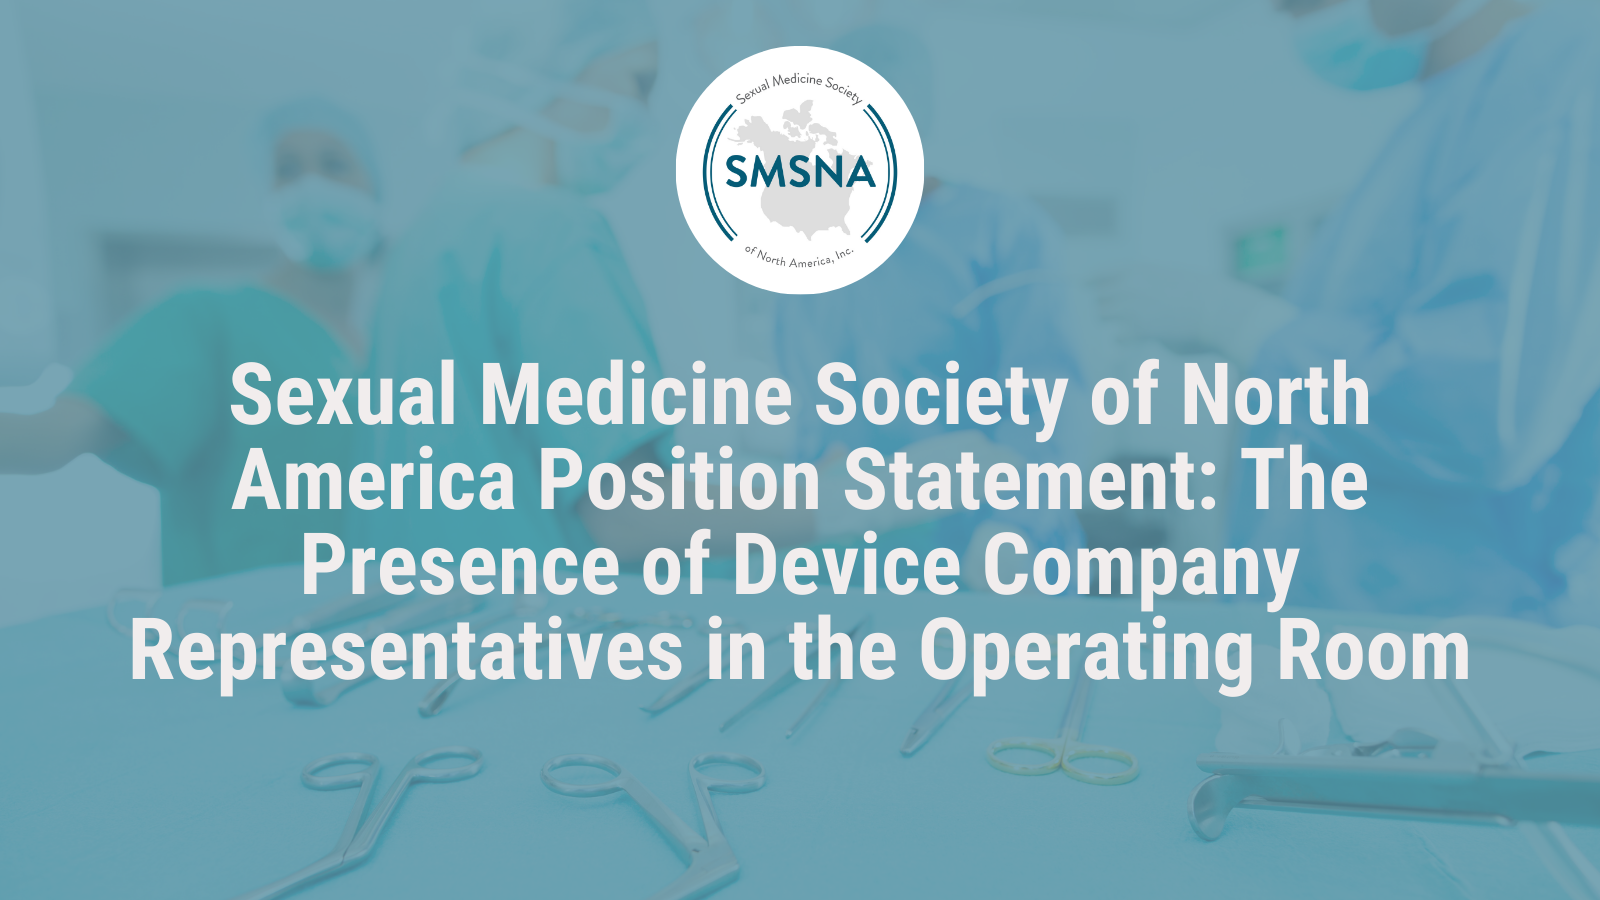 Sexual Medicine Society of North America Position Statement: The Presence of Device Company Representatives in the Operating Room